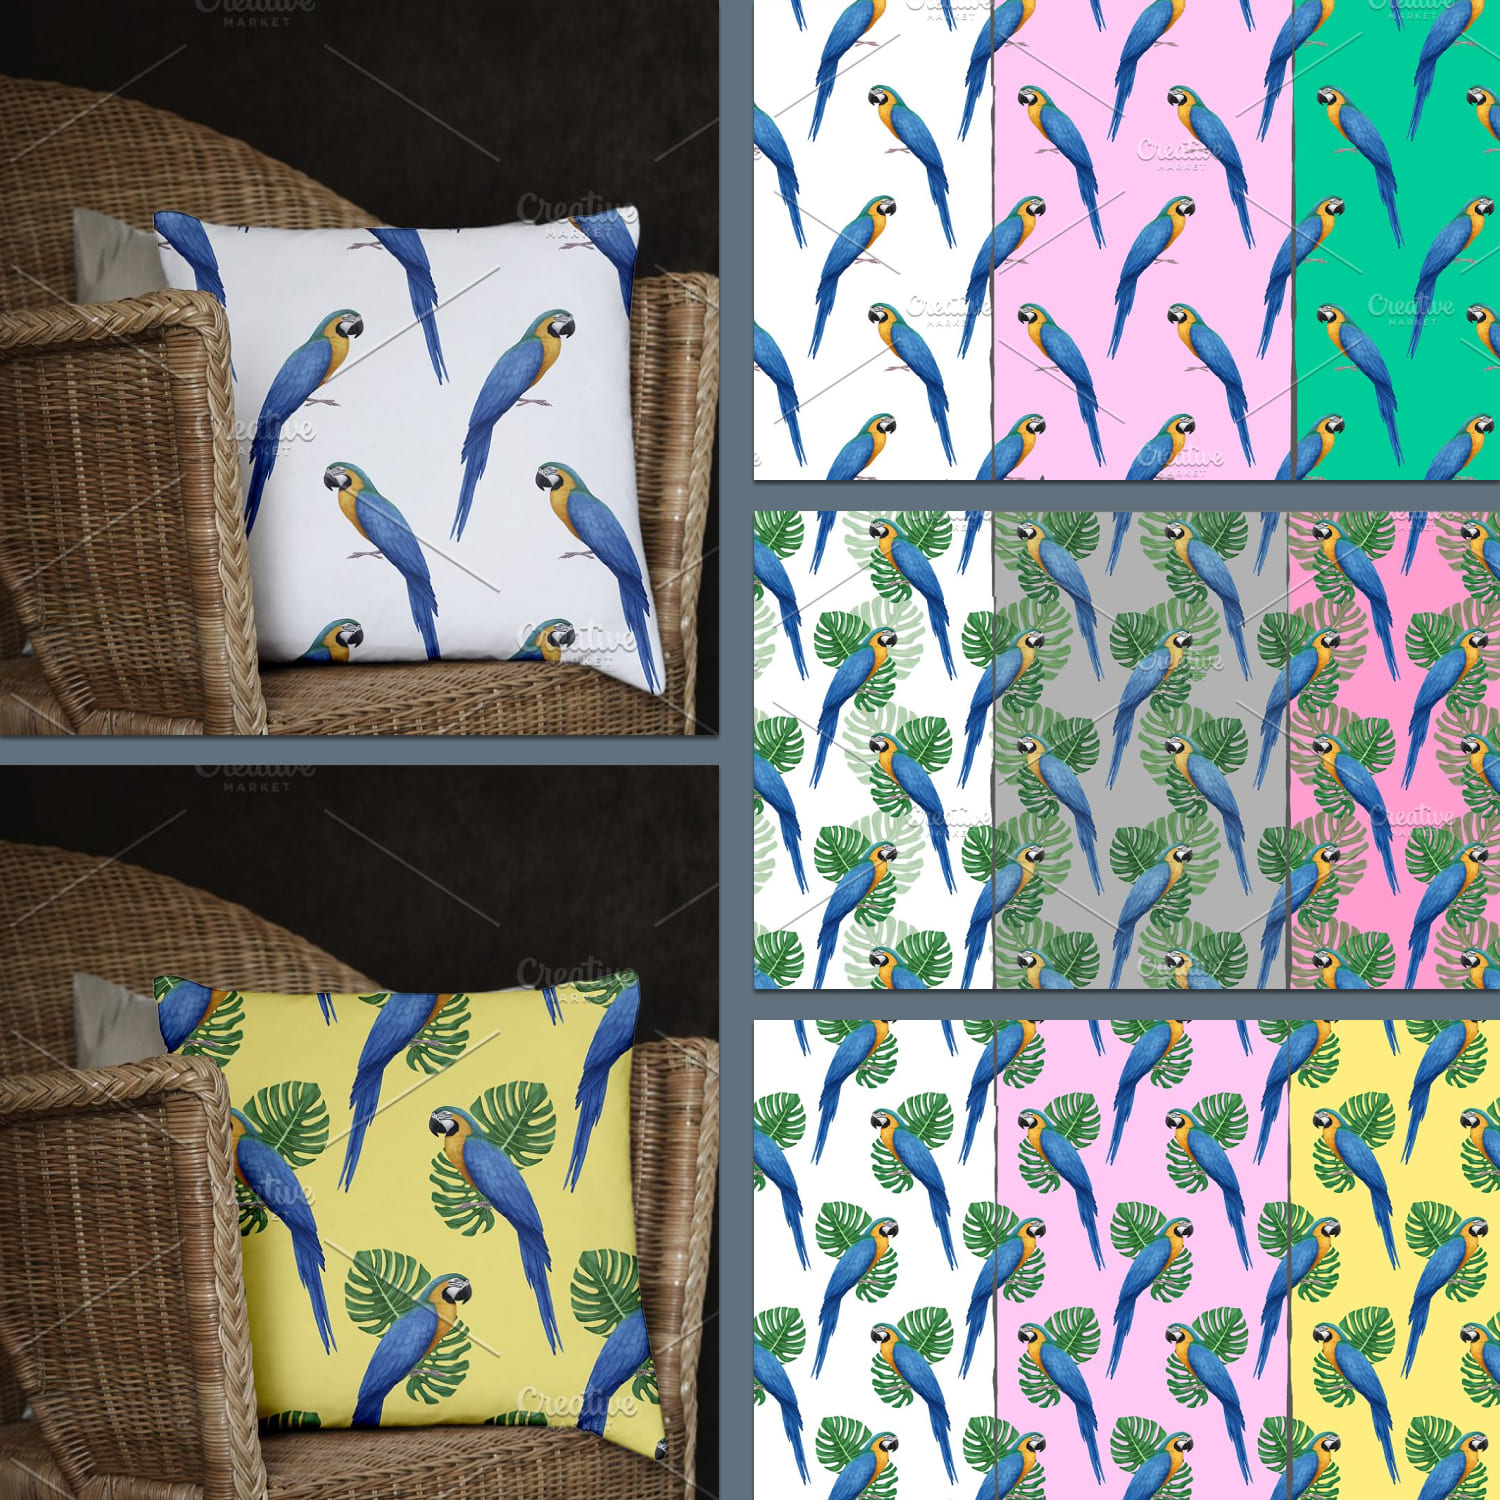 Parrot // Pattern Design created by Victoria_Novak.